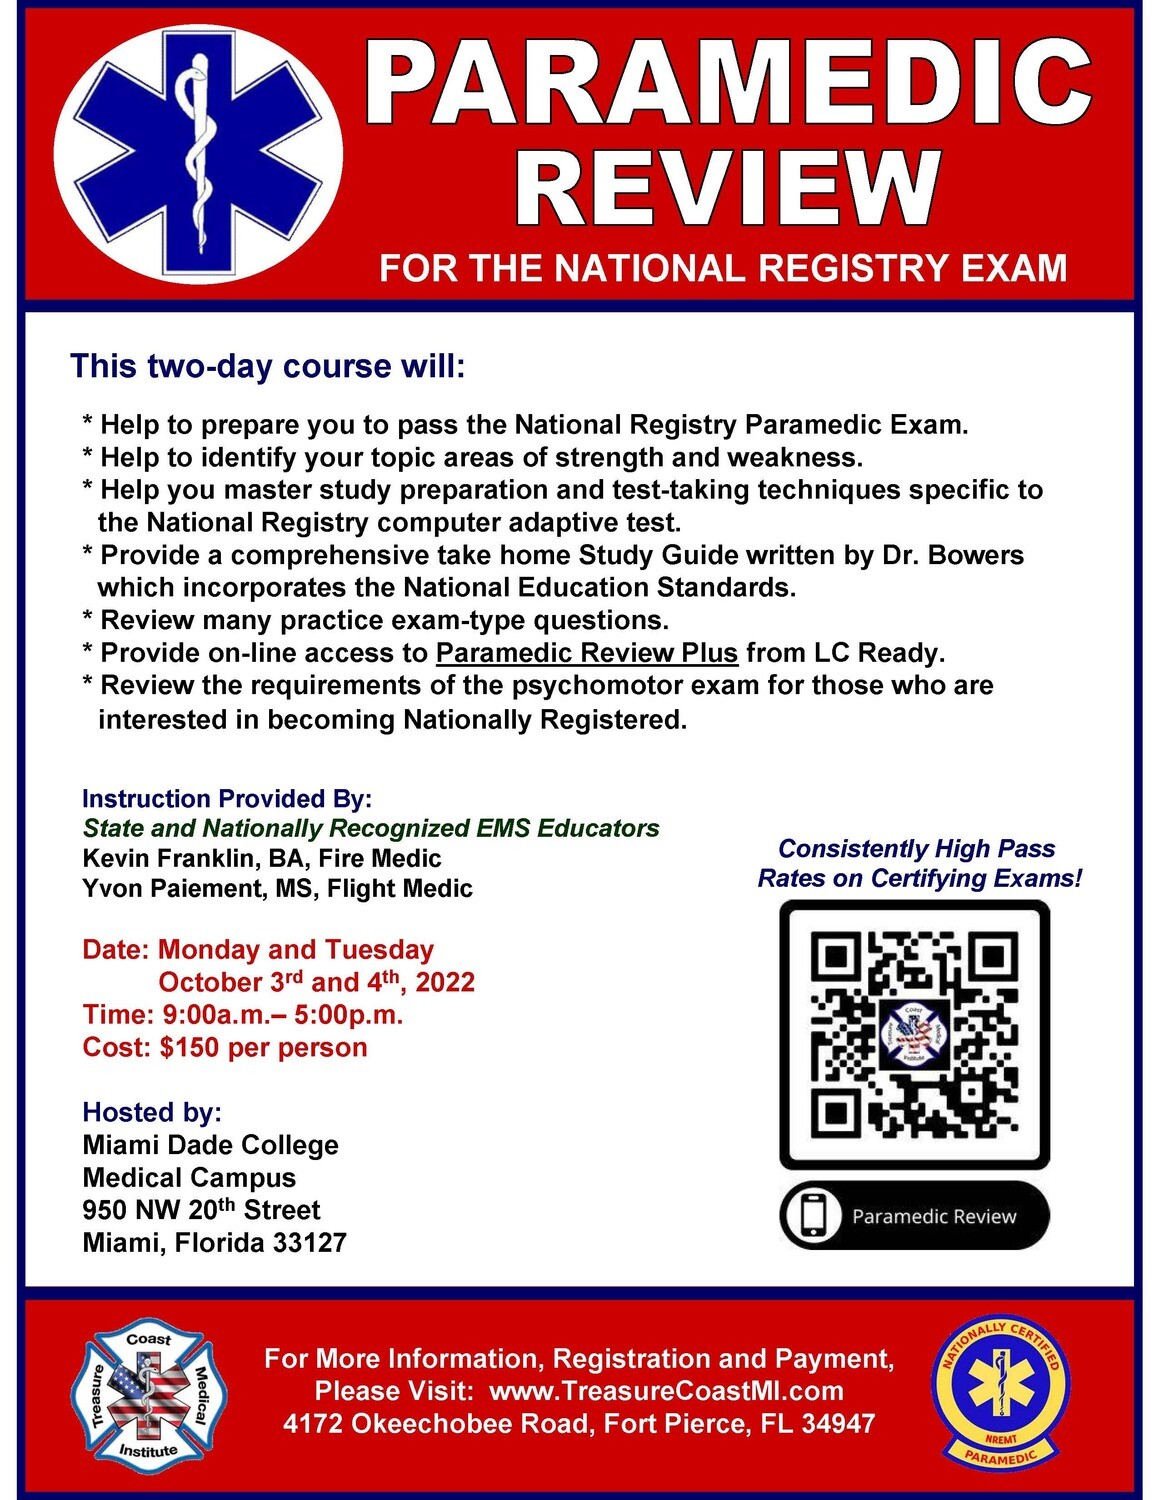 National Registry Paramedic October 3rd and 4th Miami Dade